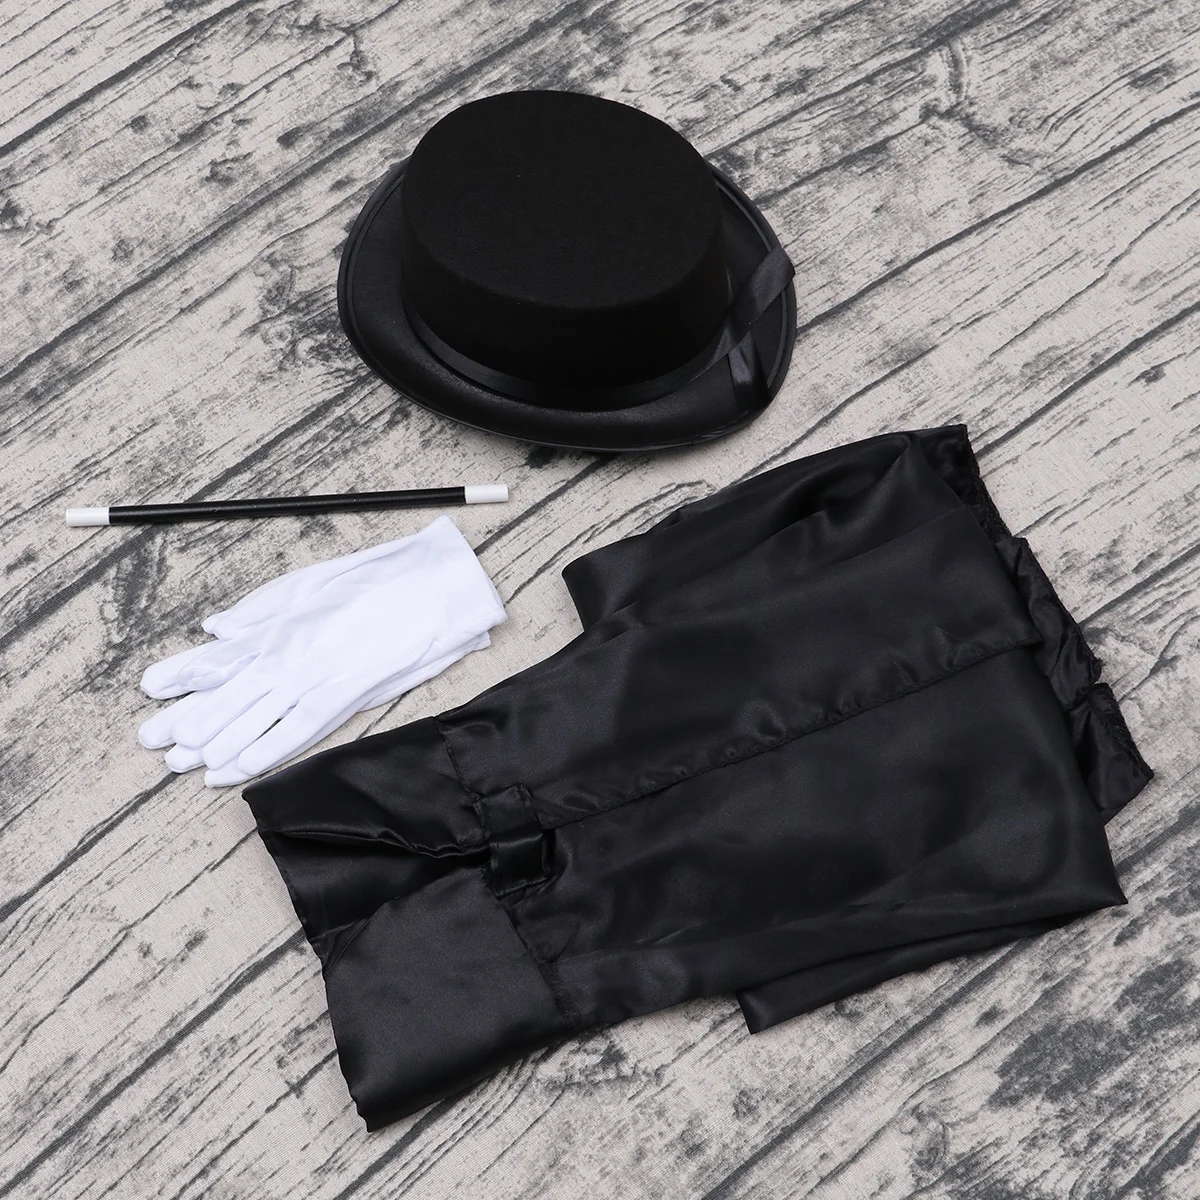 5PCS Black and White Dress-Up Role Play Magician Clothes Magician Costume Magician Outfit for Masquerade Halloween Performance images - 6